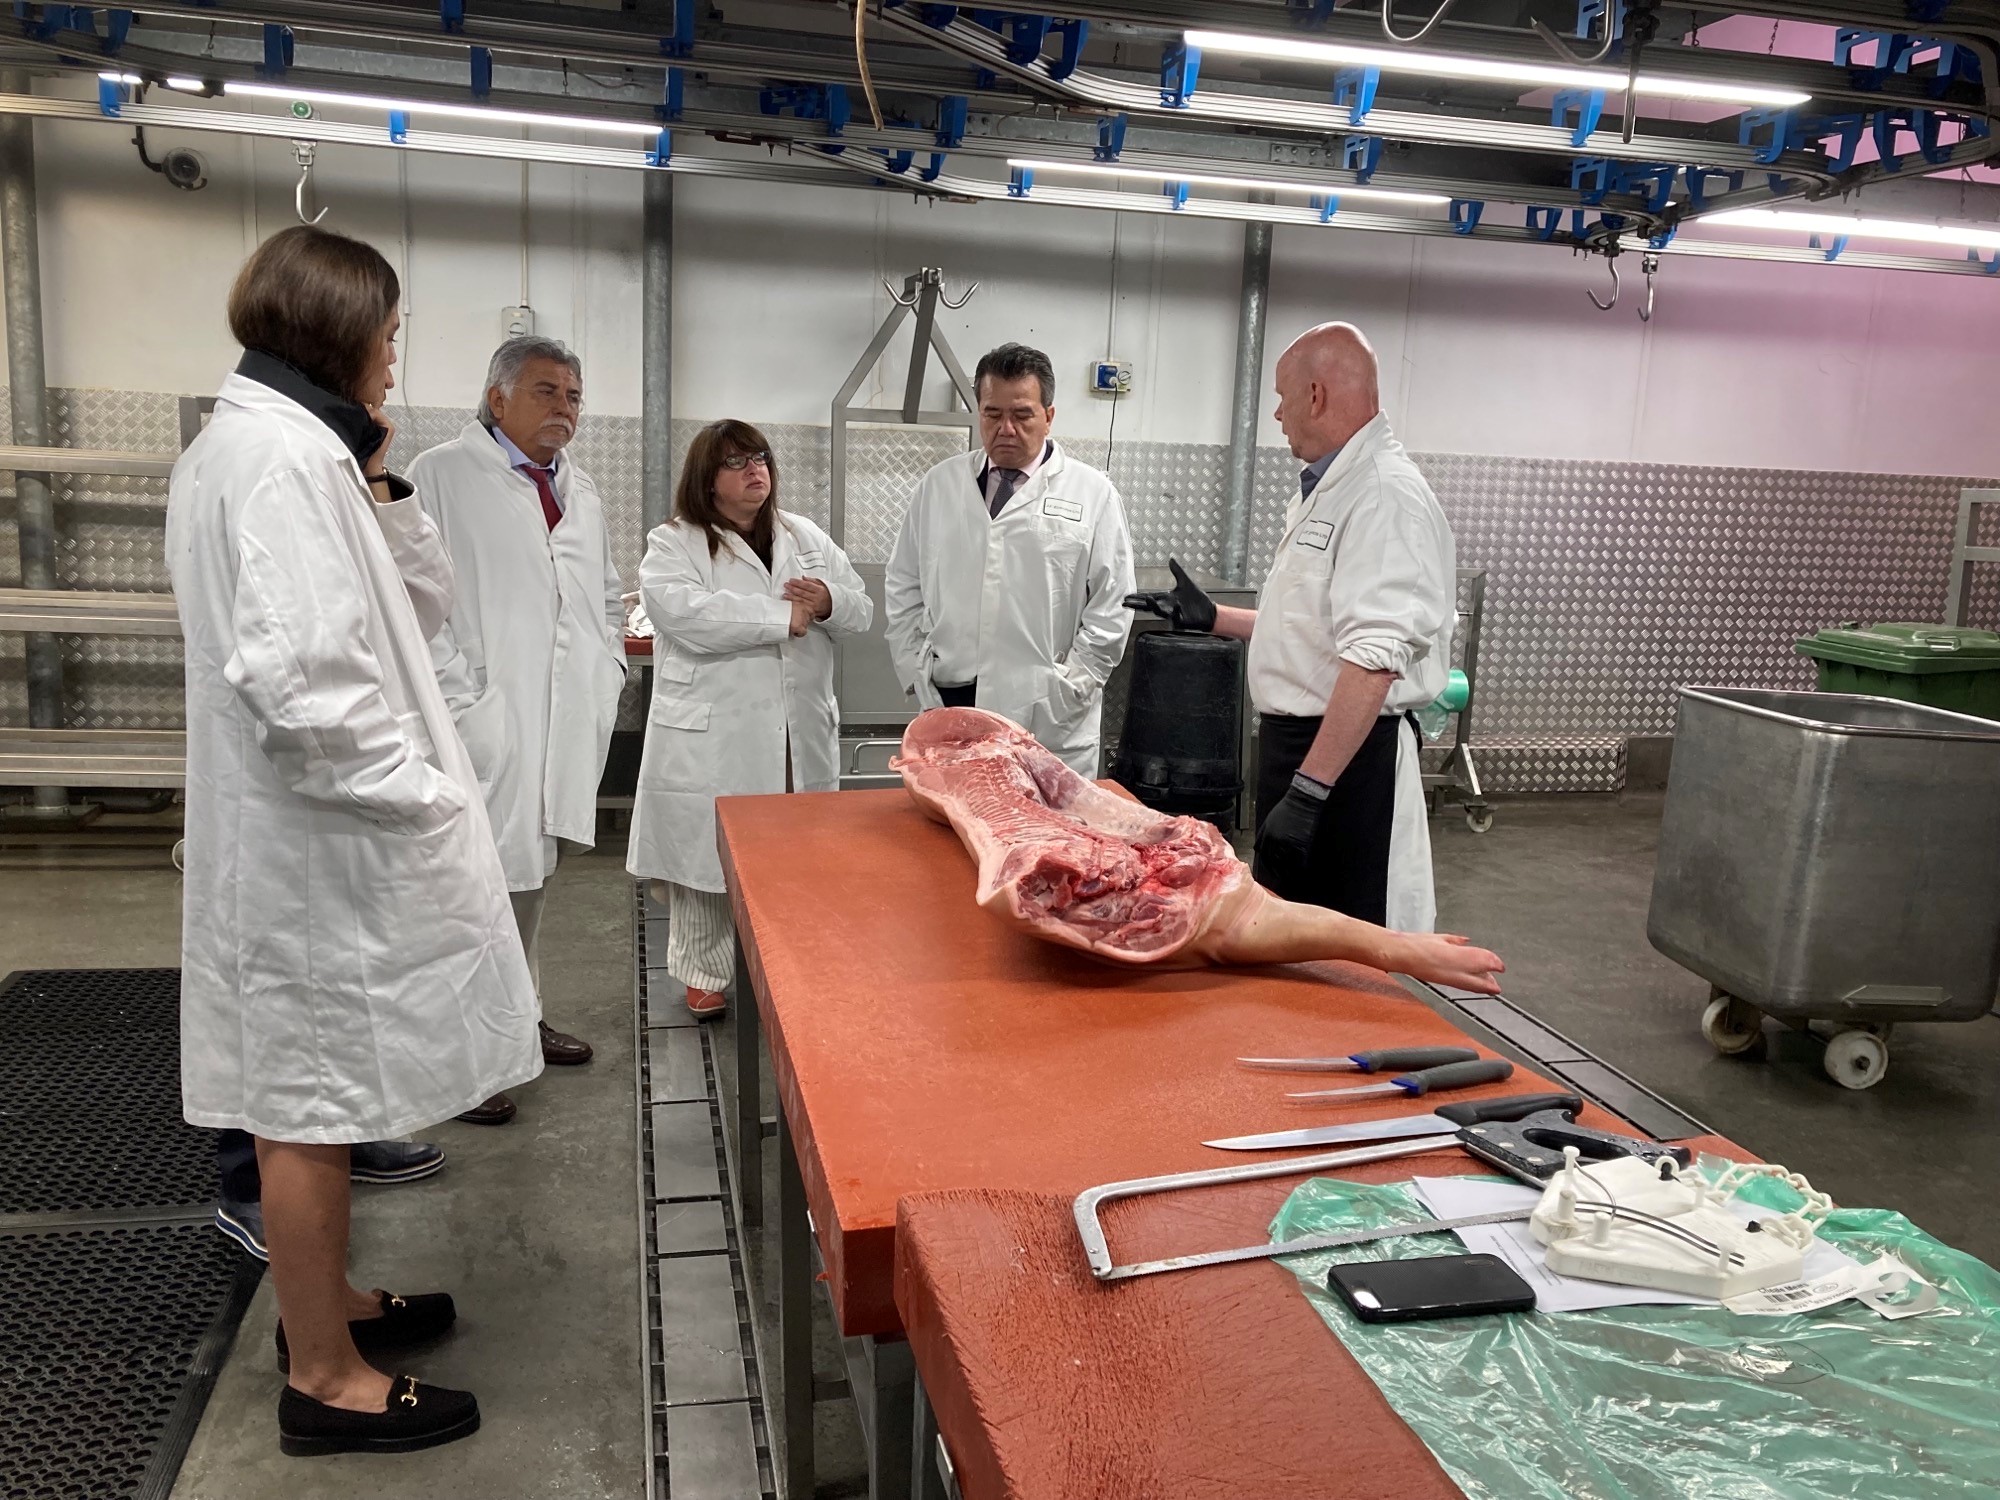 A group of people watching a demonstration on a pork carcase